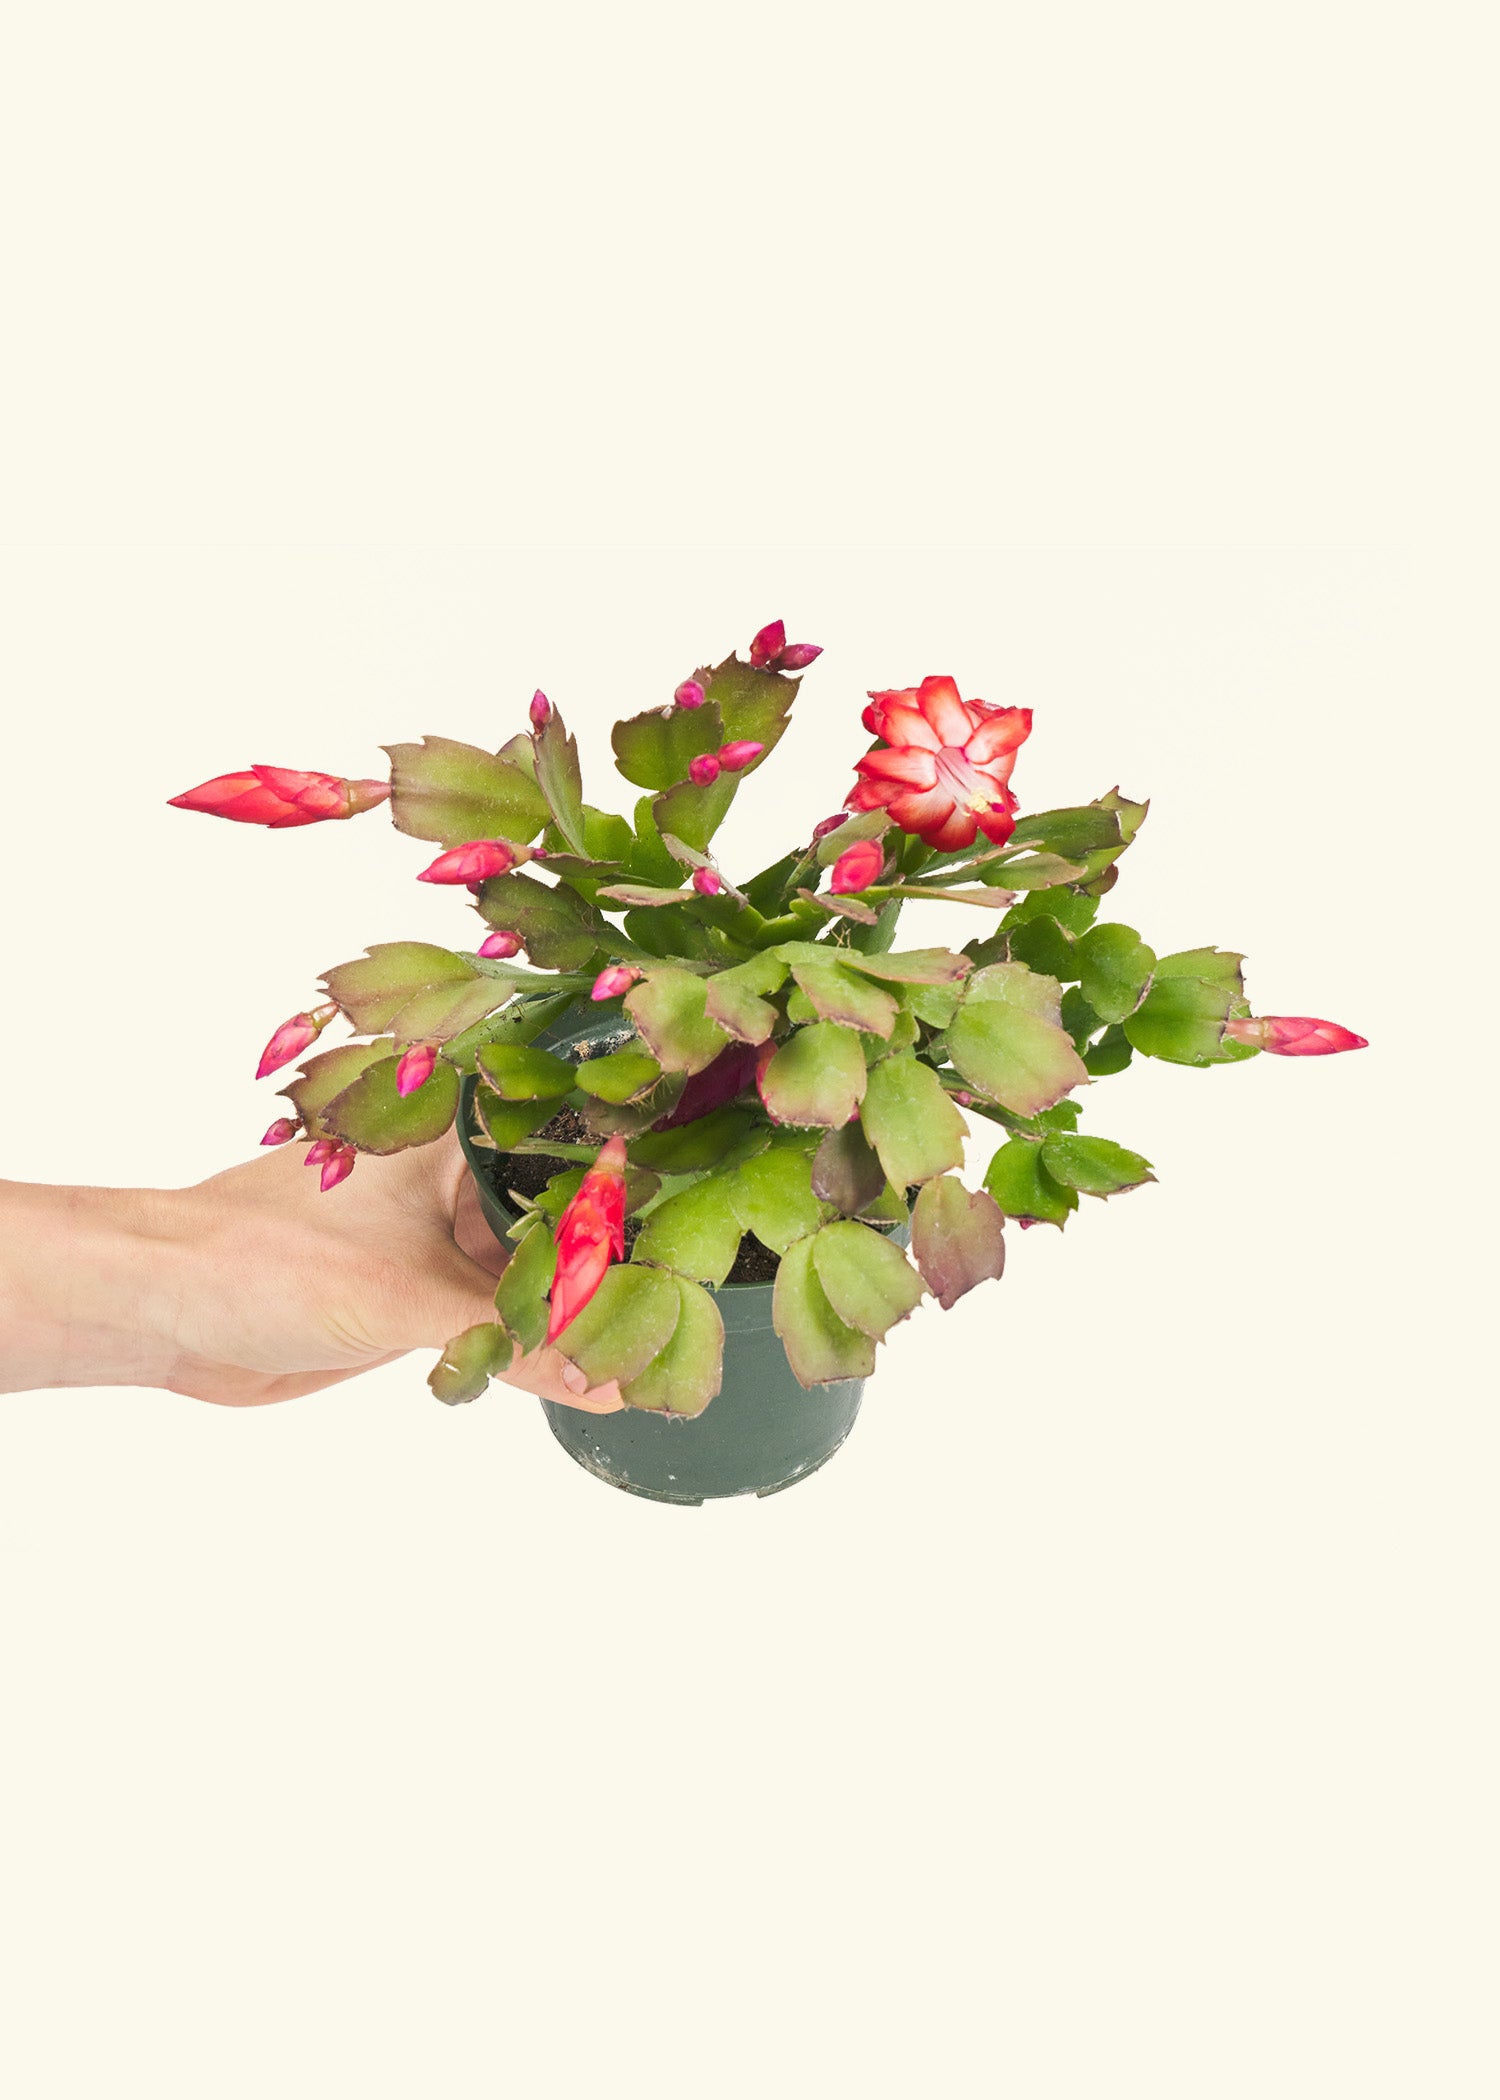 Small Red Christmas Cactus in a grow pot.